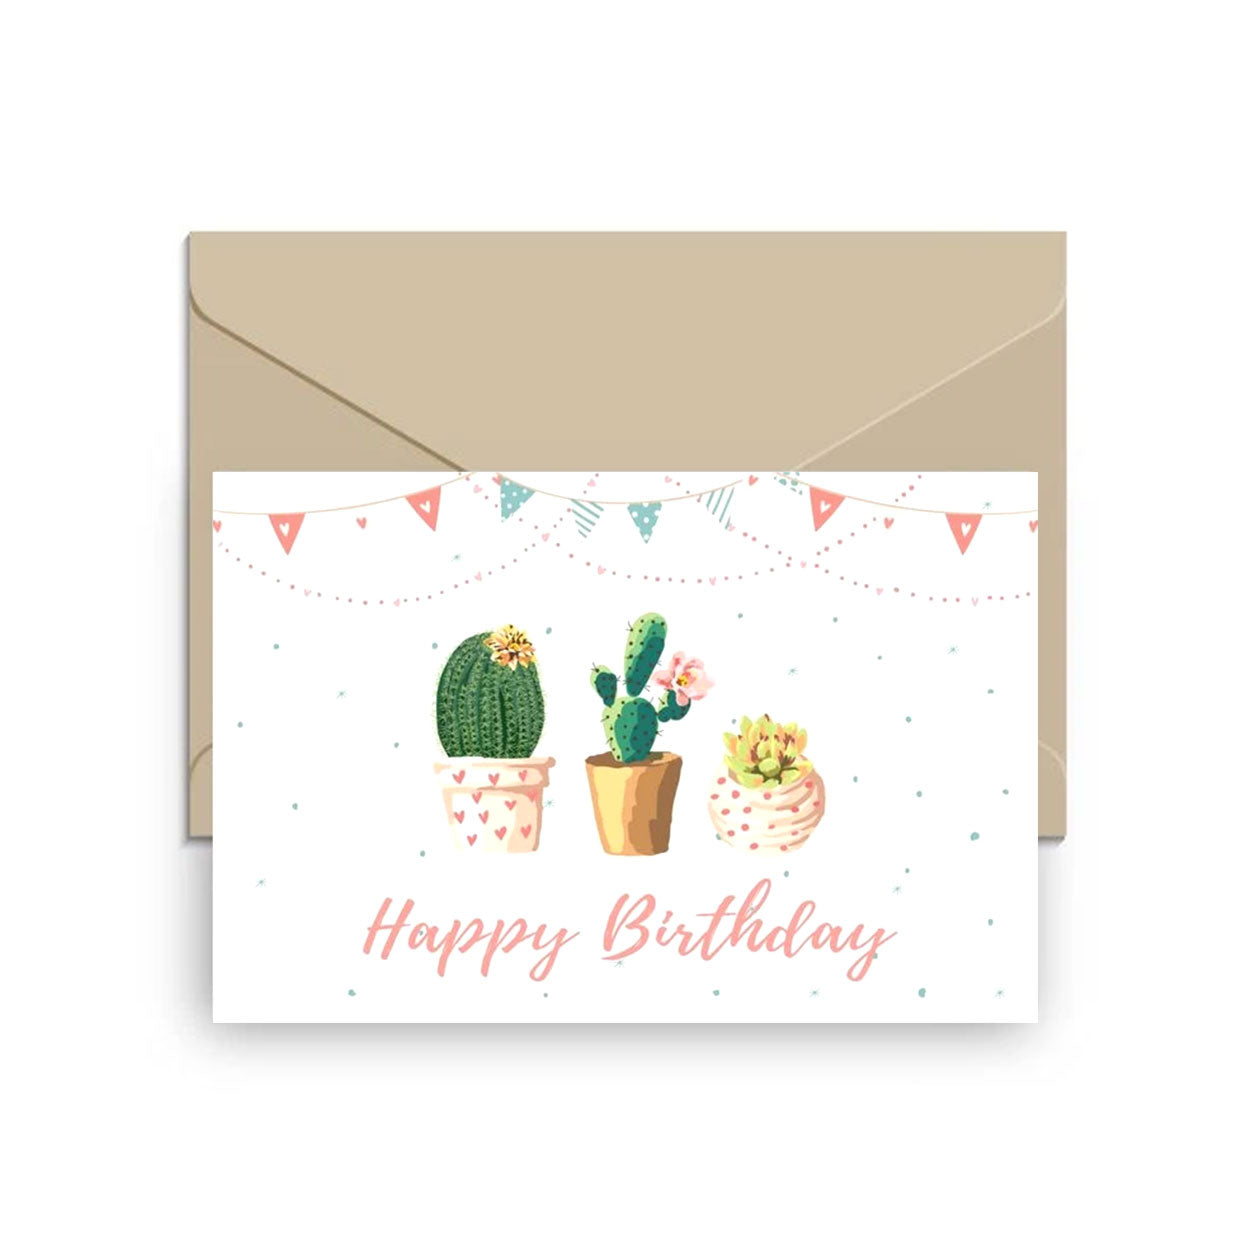 Happy Birthday Cake Card for sale, Succulent Happy Birthday Card for sale, Cactus Birthday Greeting Card, Succulents Greeting Card, Succulents Gift Ideas